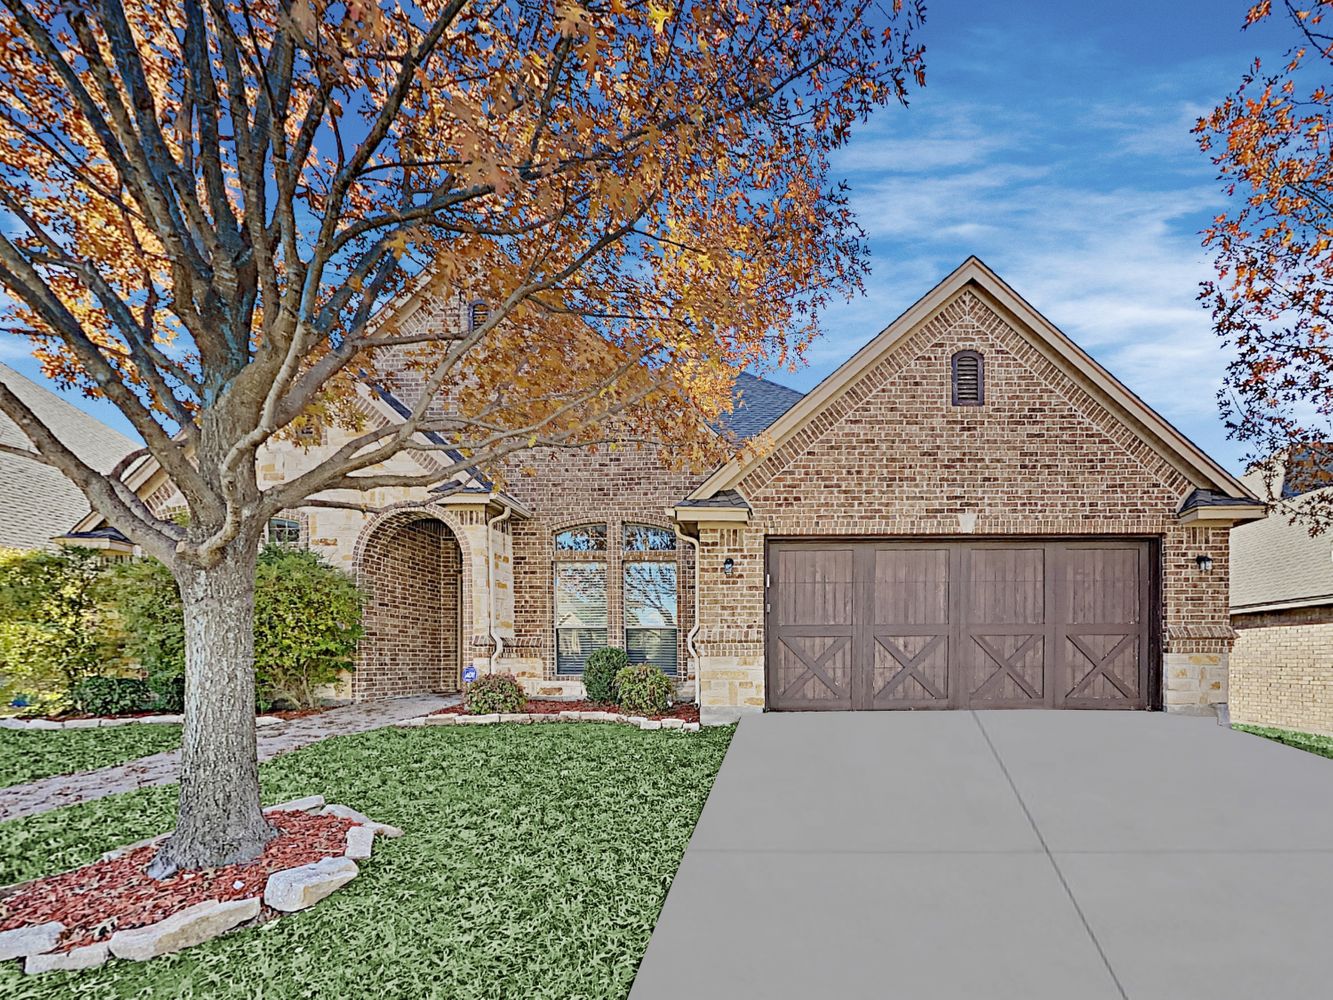 Front of home of a brick house and unique barn-style garage door at Invitation Homes Dallas.